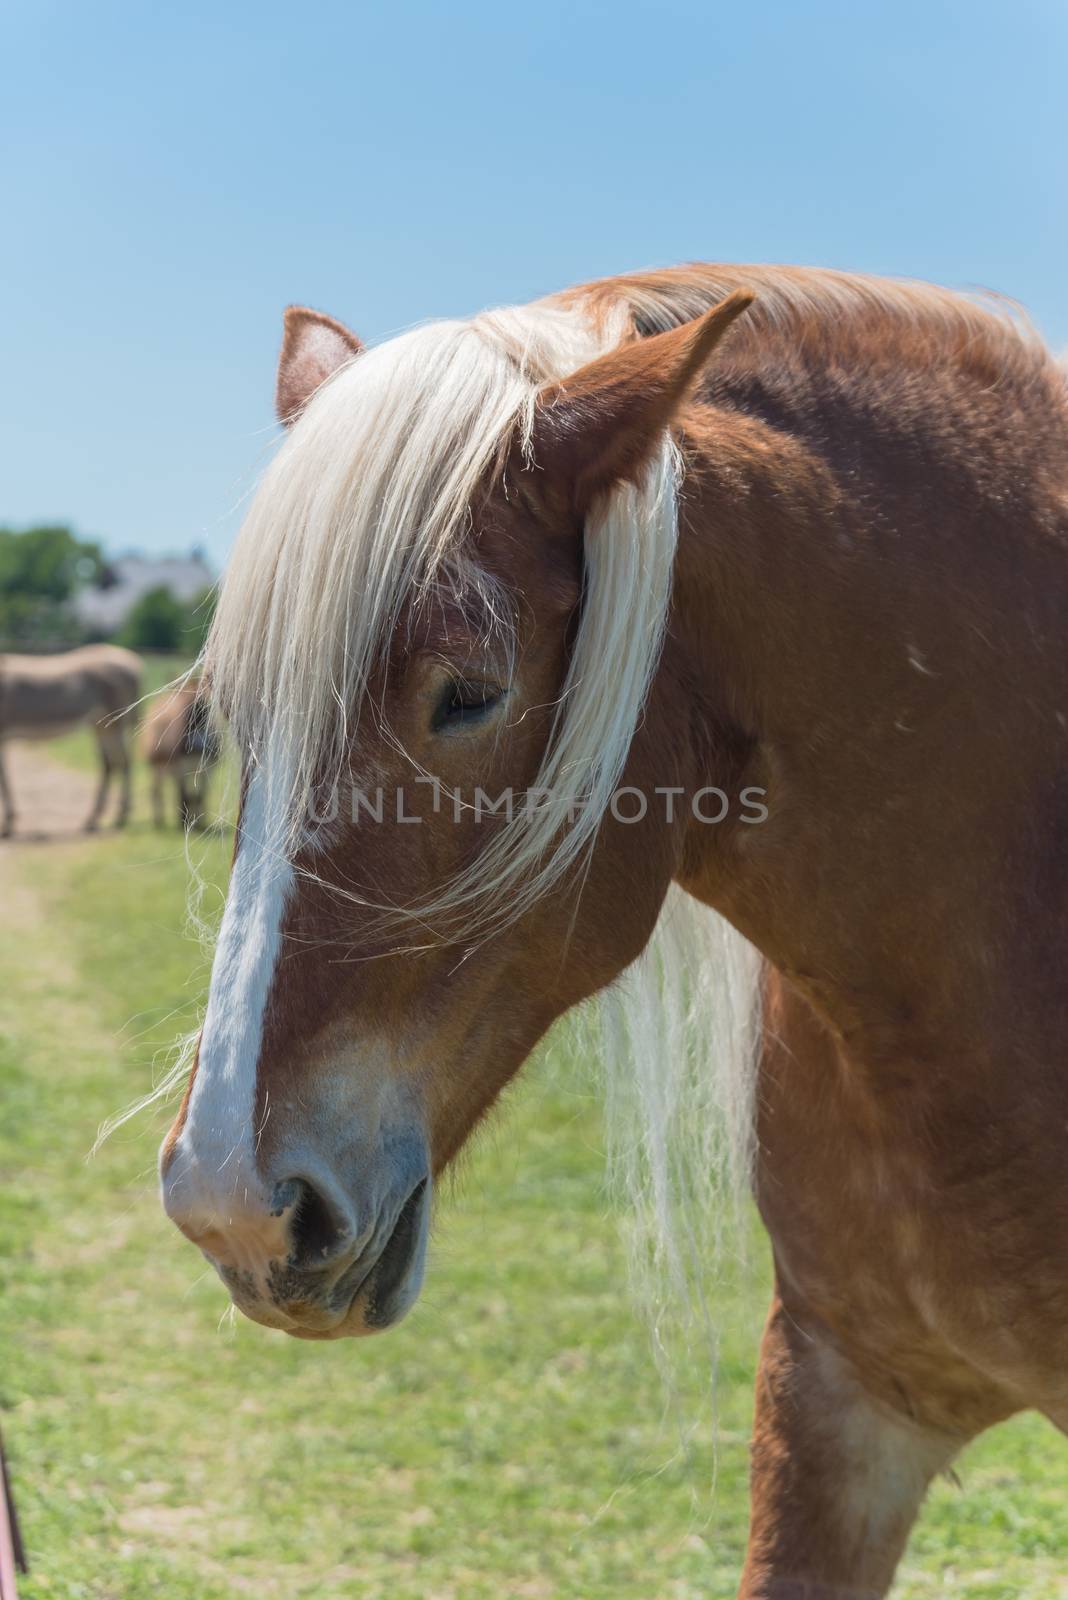 Belgian horse at American farm ranch close-up by trongnguyen